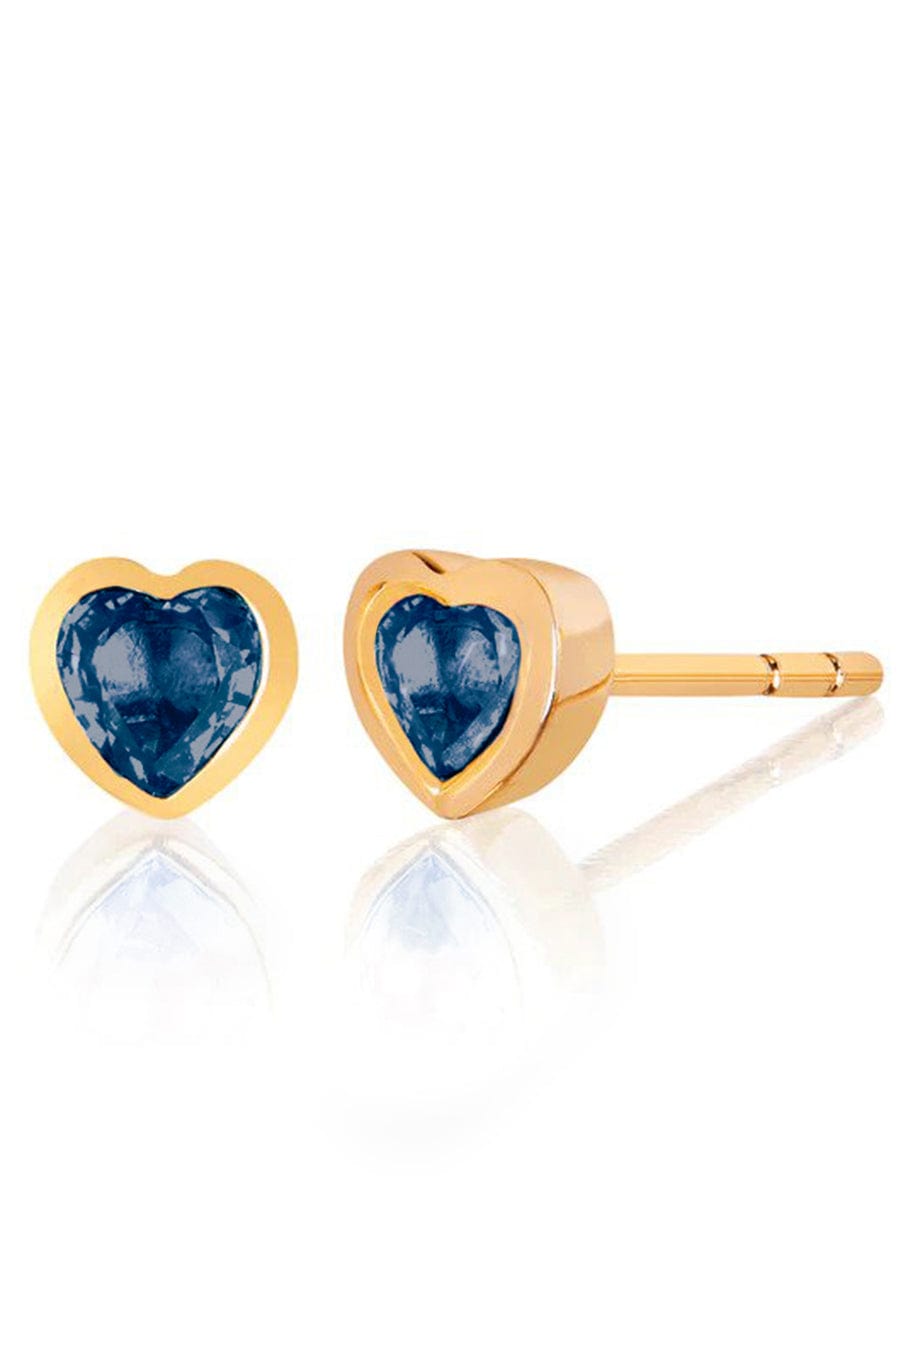 EF COLLECTION-Blue Sapphire Heart Stud-YELLOW GOLD